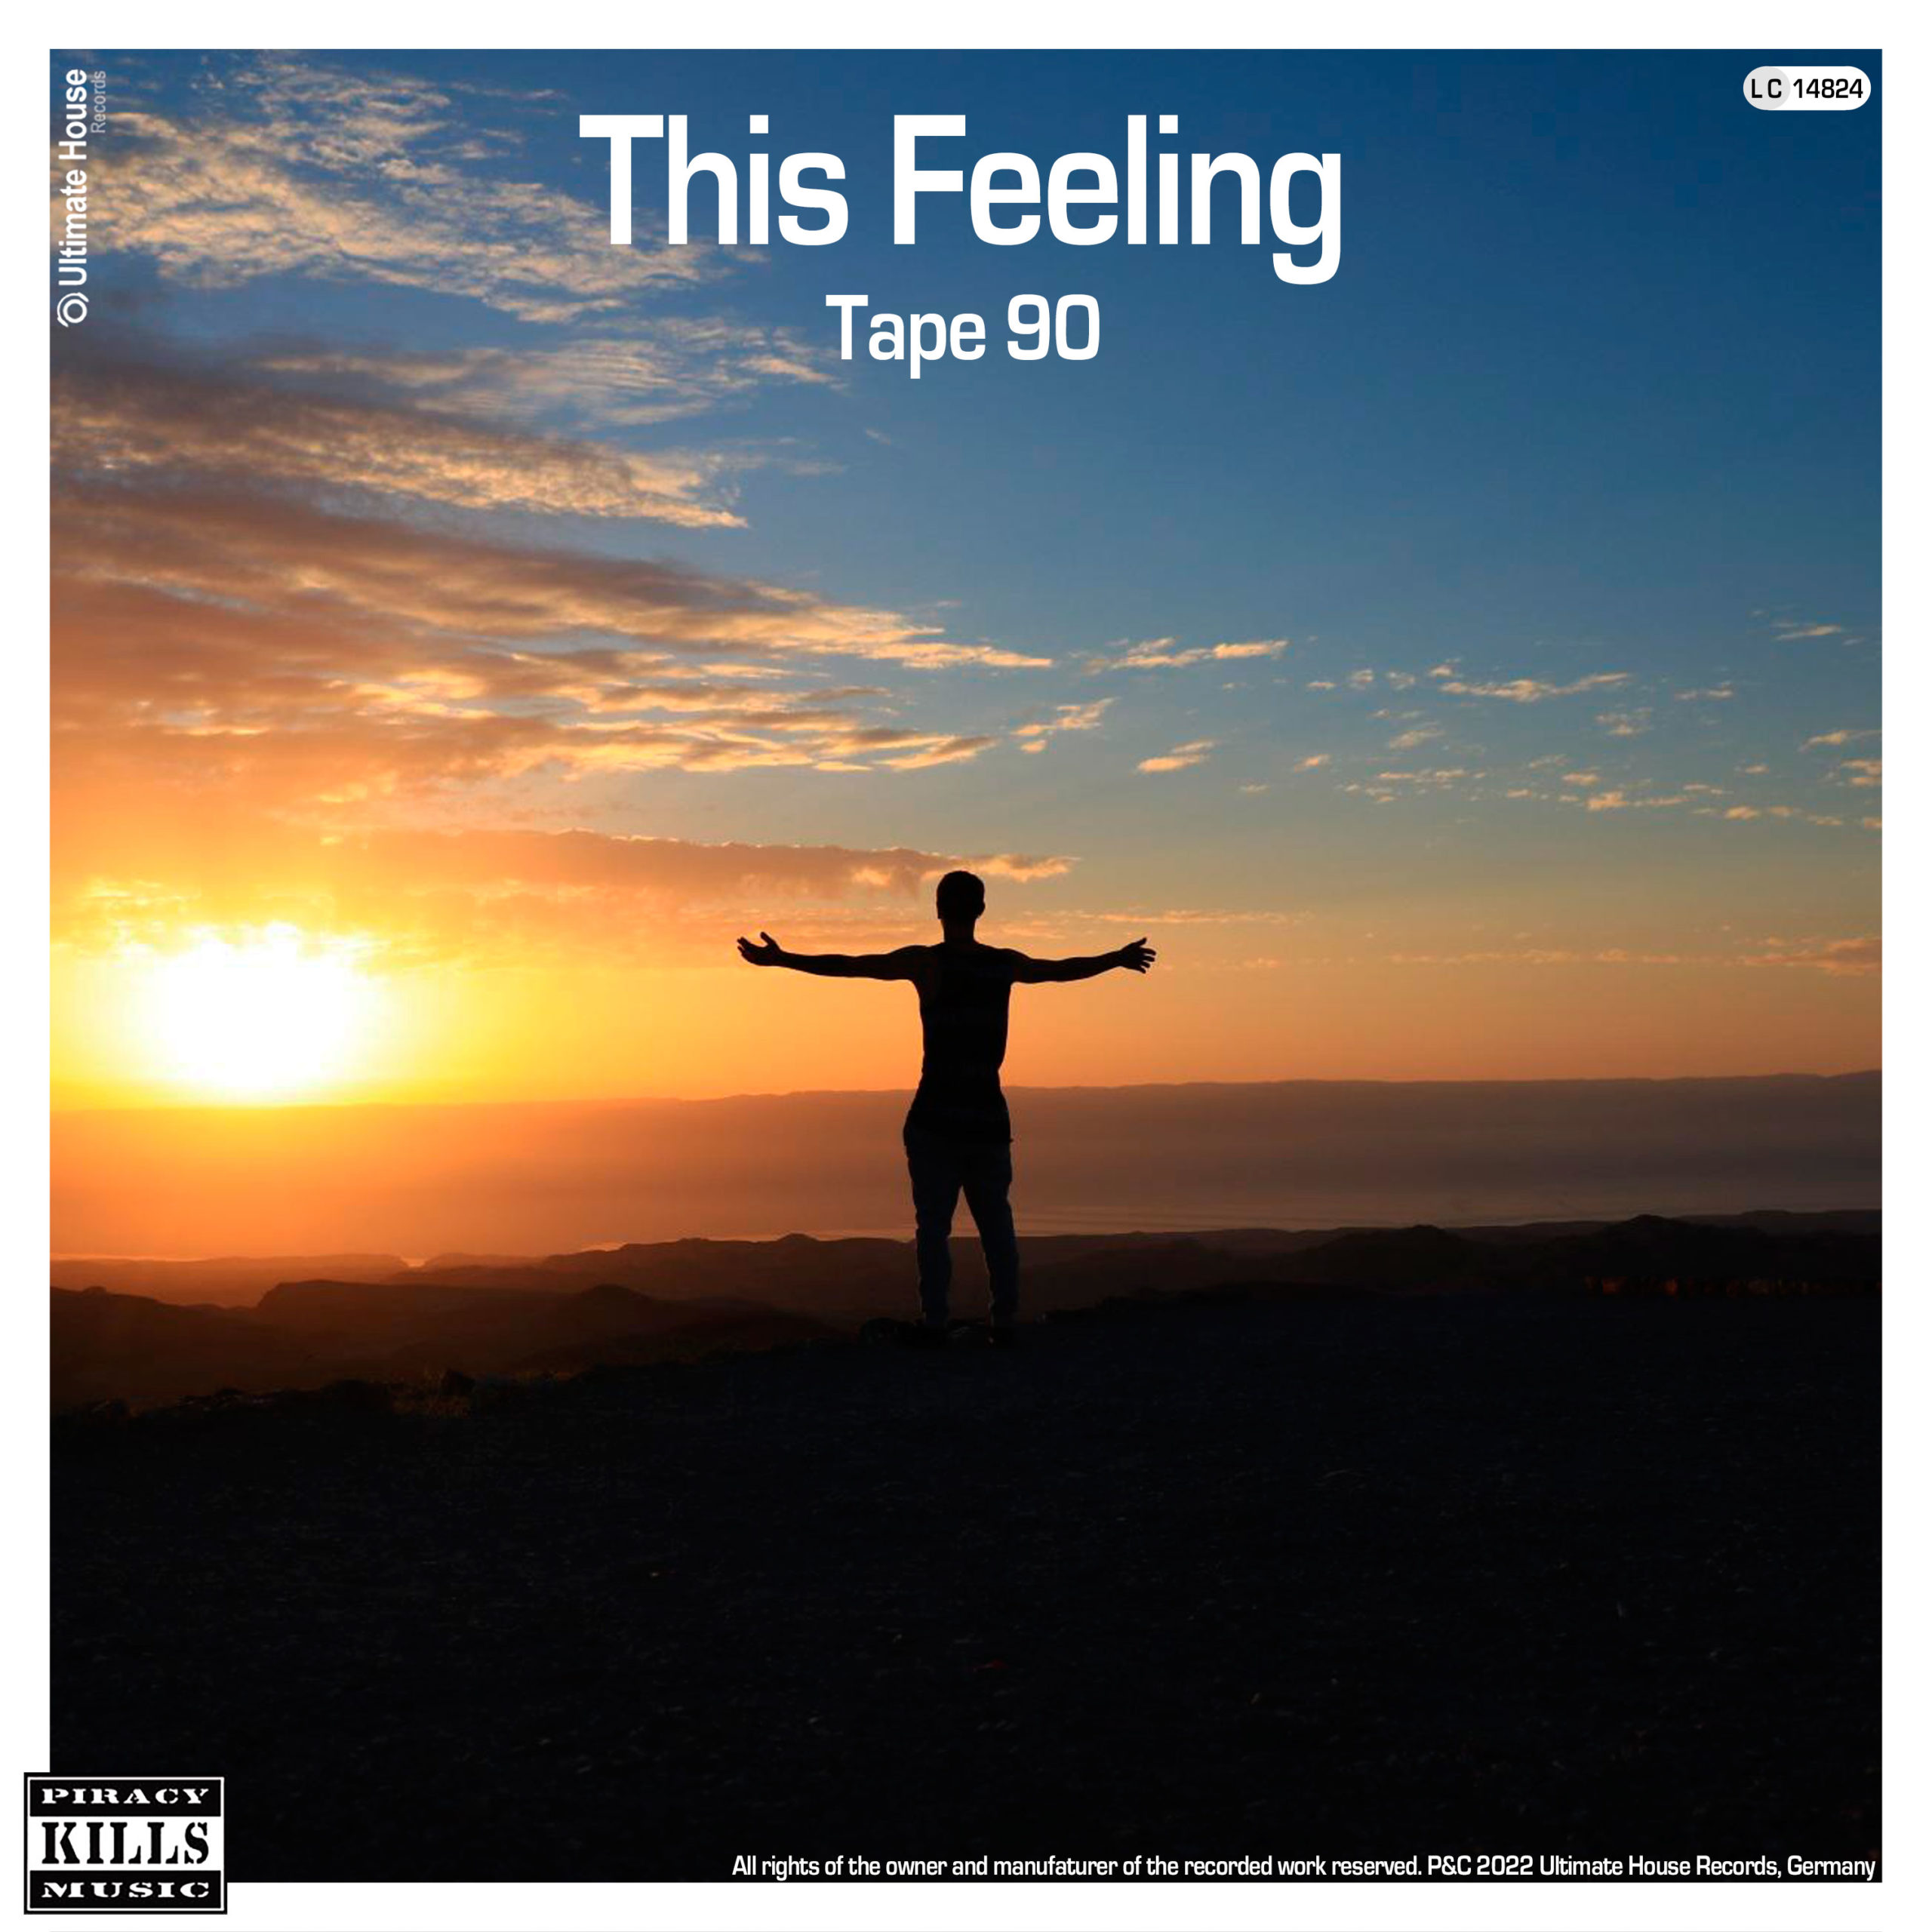 https://www.ultimate-house-records.com/wp-content/uploads/2022/06/161-This_Feeling-Cover_3000px_web-scaled.jpg